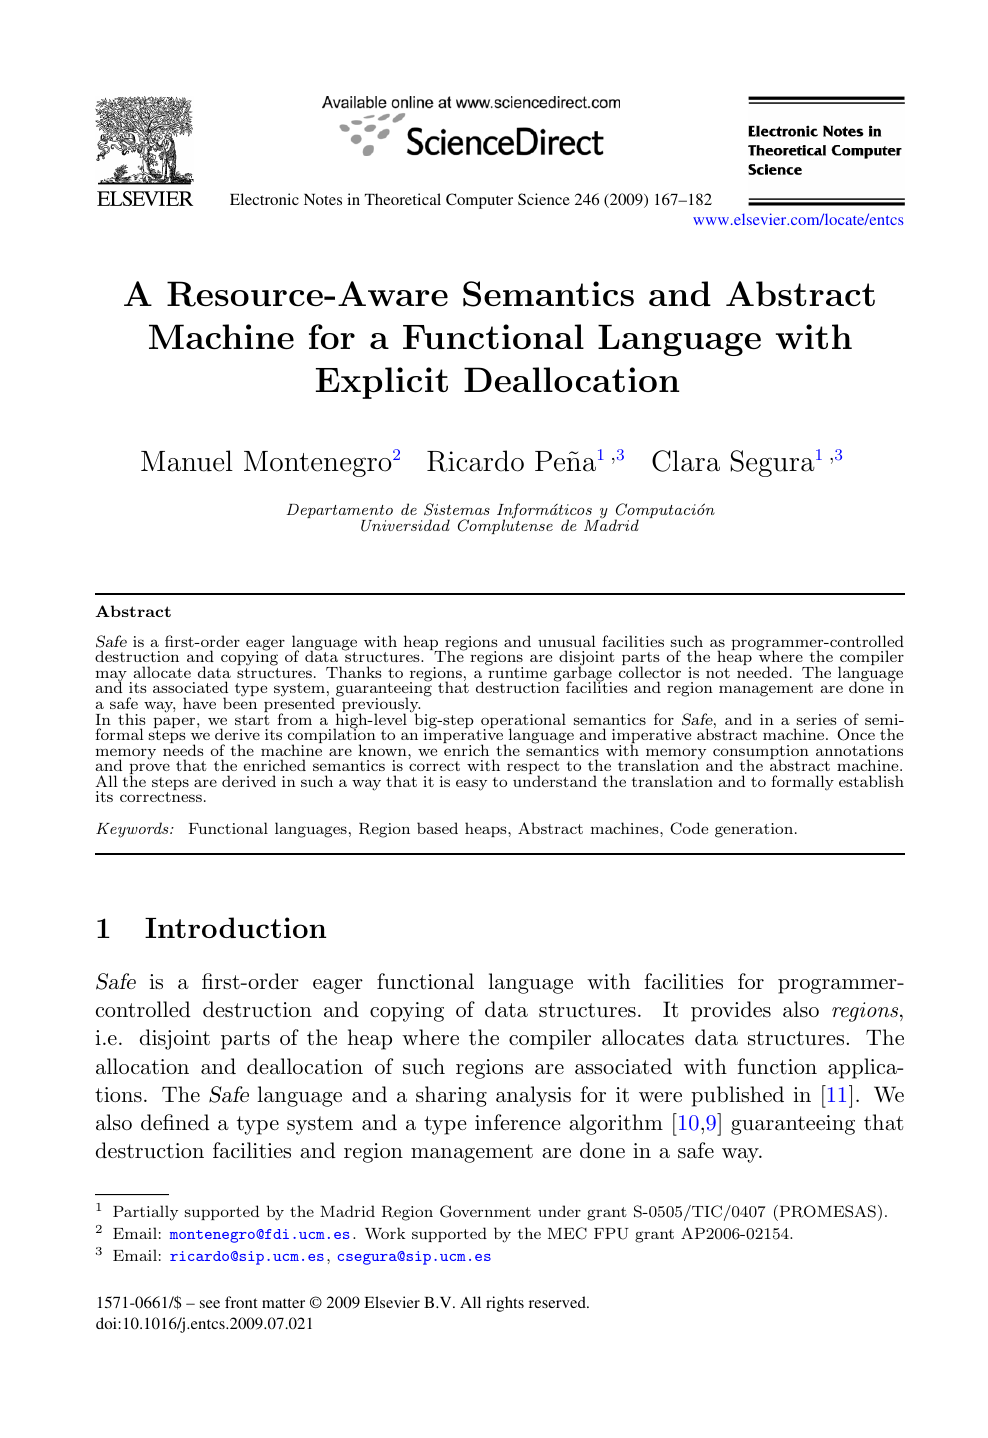 A Resource Aware Semantics And Abstract Machine For A Functional Language With Explicit Deallocation Topic Of Research Paper In Computer And Information Sciences Download Scholarly Article Pdf And Read For Free On